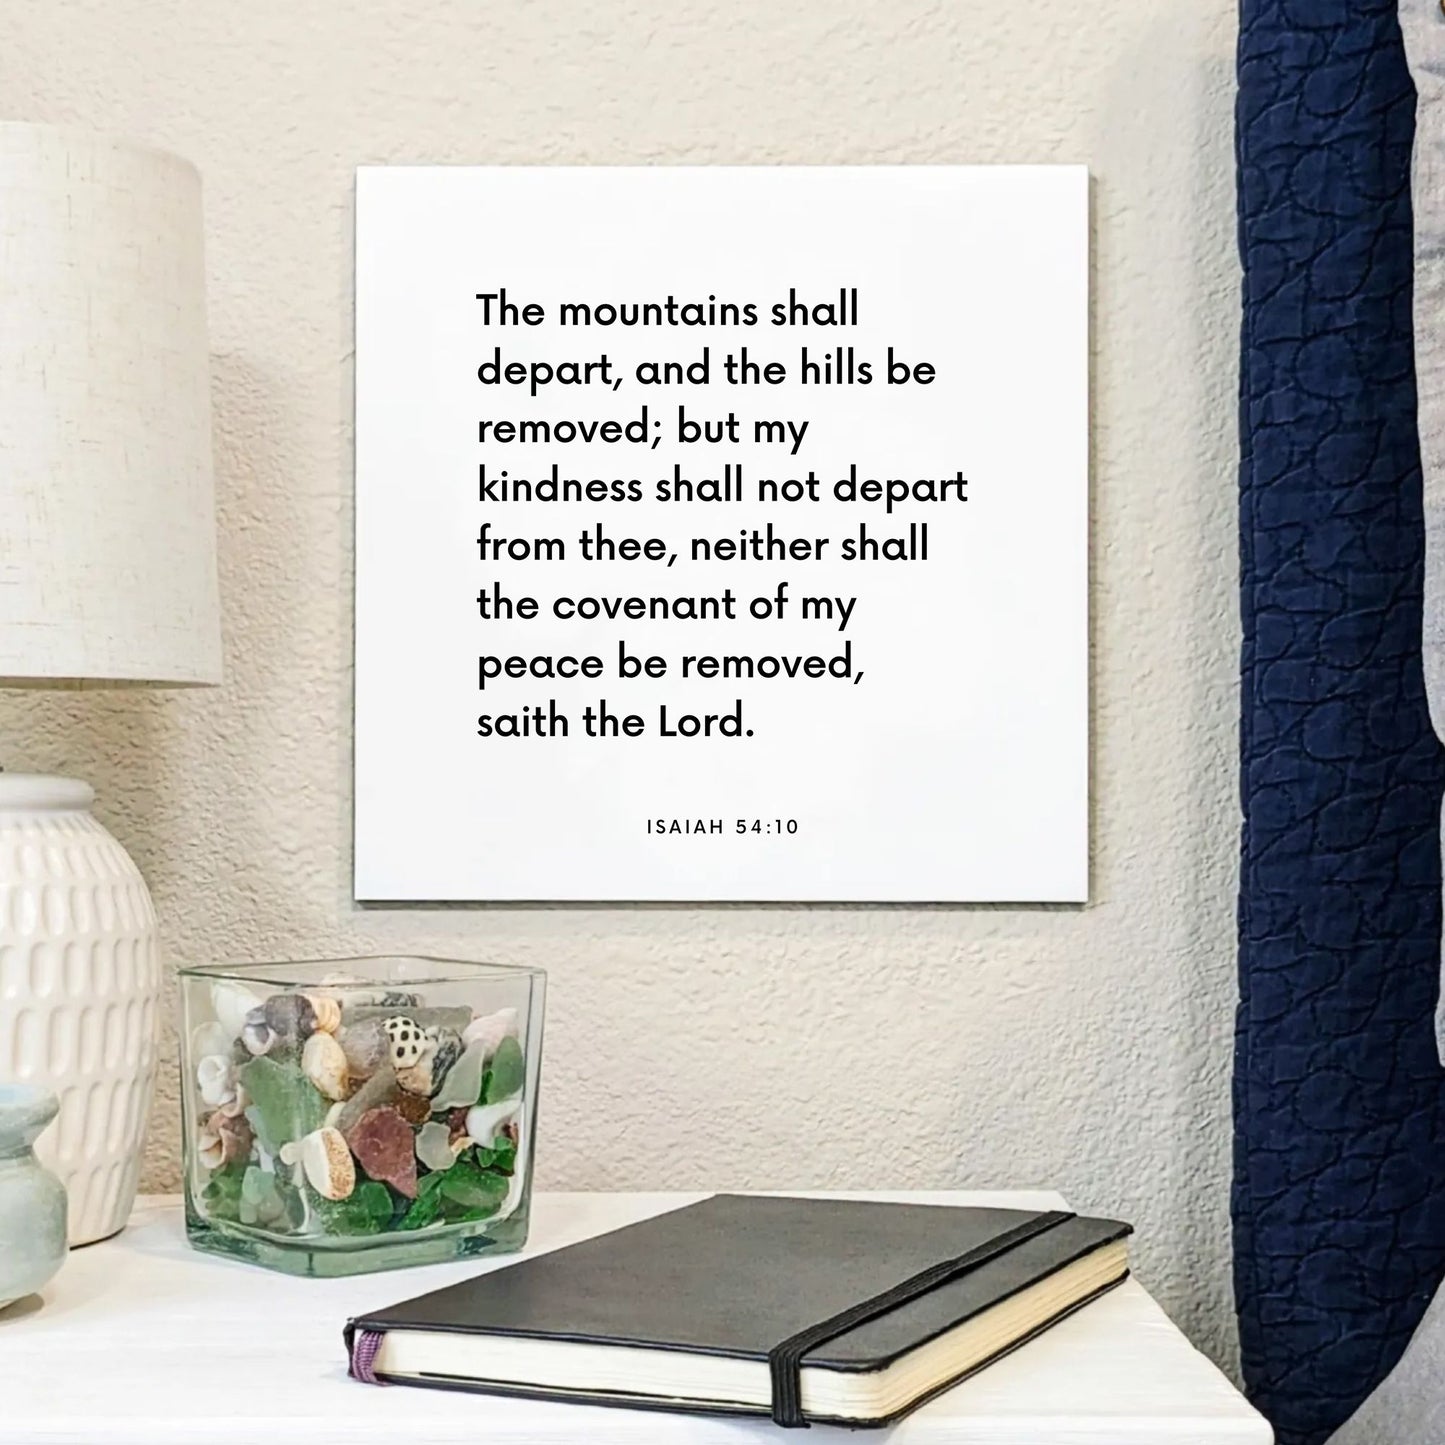 Bedside mouting of the scripture tile for Isaiah 54:10 - "My kindness shall not depart from thee"